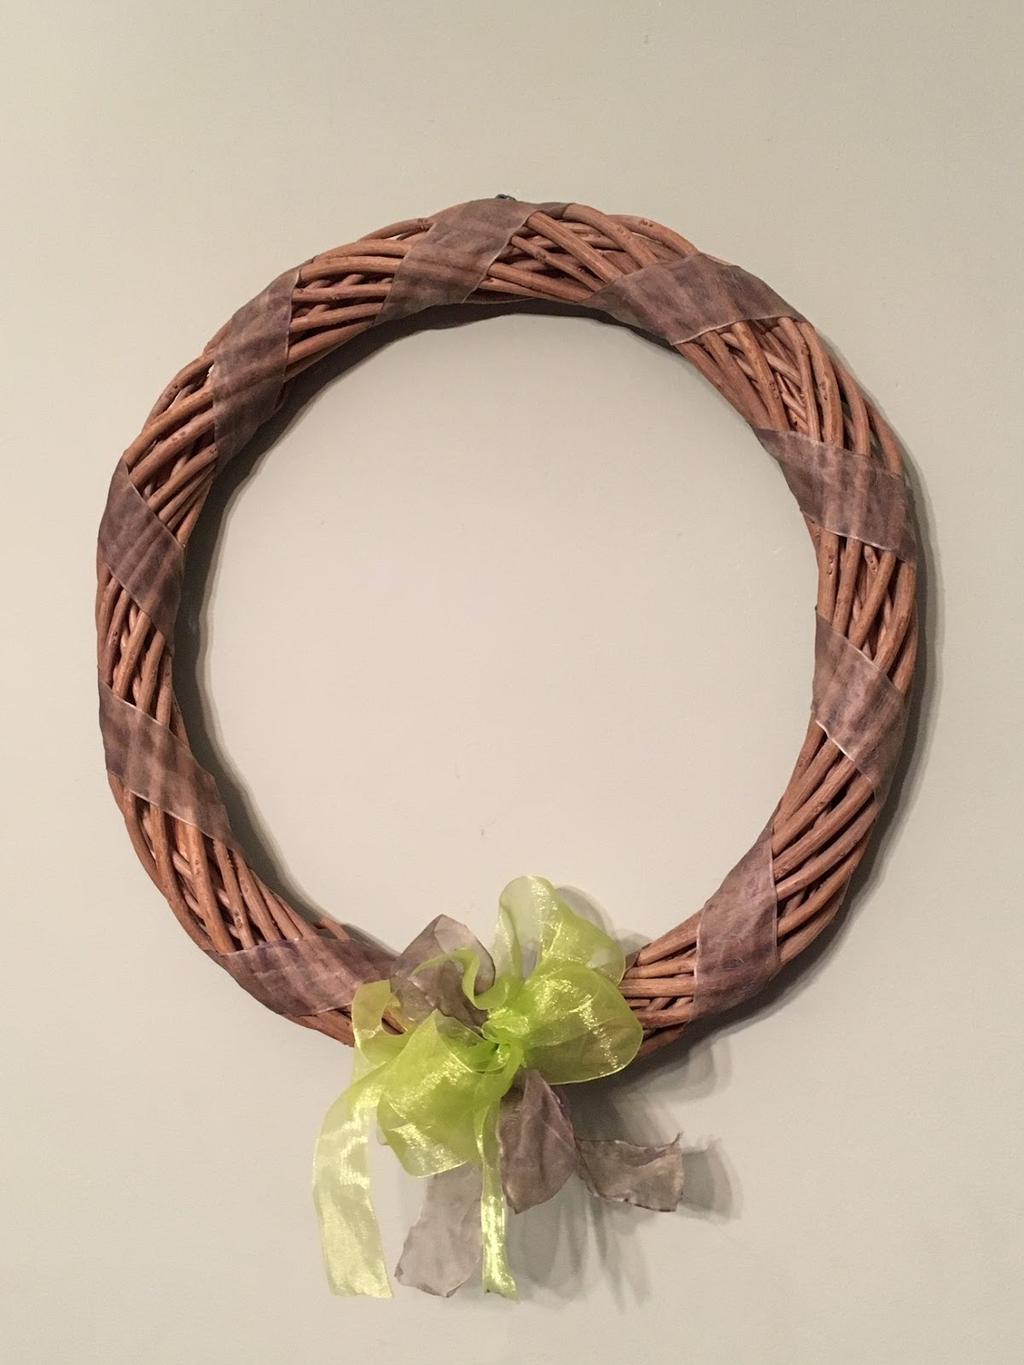 To make this, you will need a grapevine wreath, a bow (we chose green to represent the growth we will experience during Great Lent), colored paper,